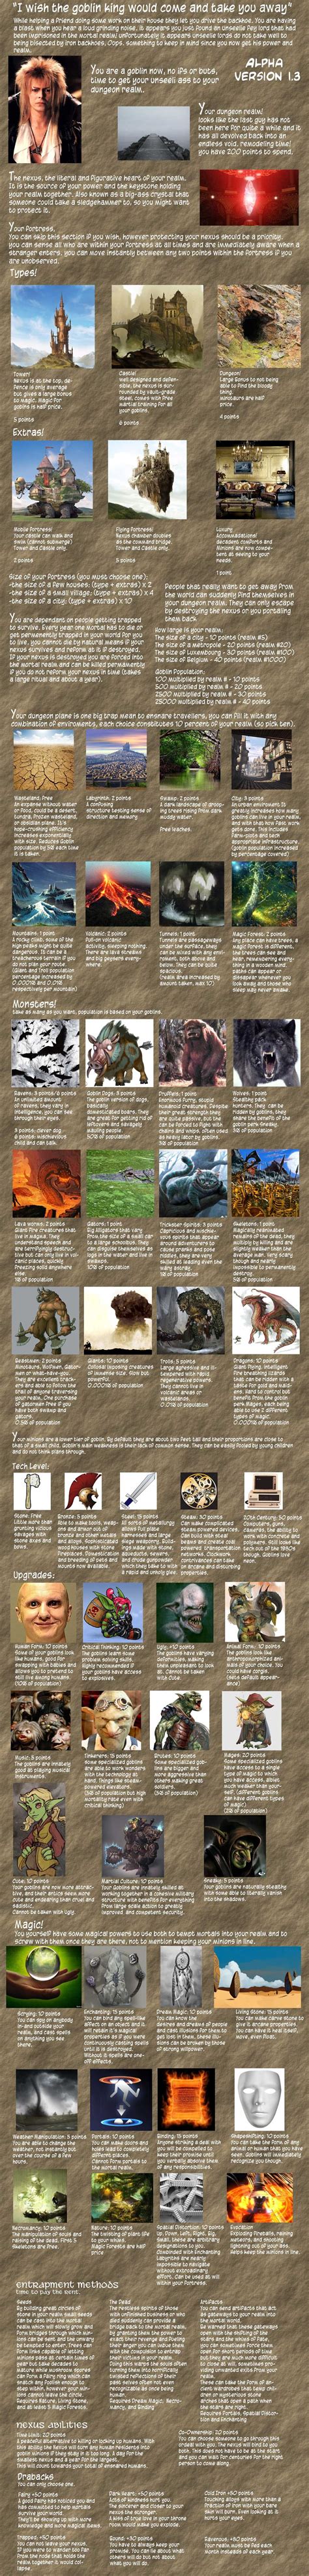 Goblin King Cyoa Nicked From Tg Like Everything Else